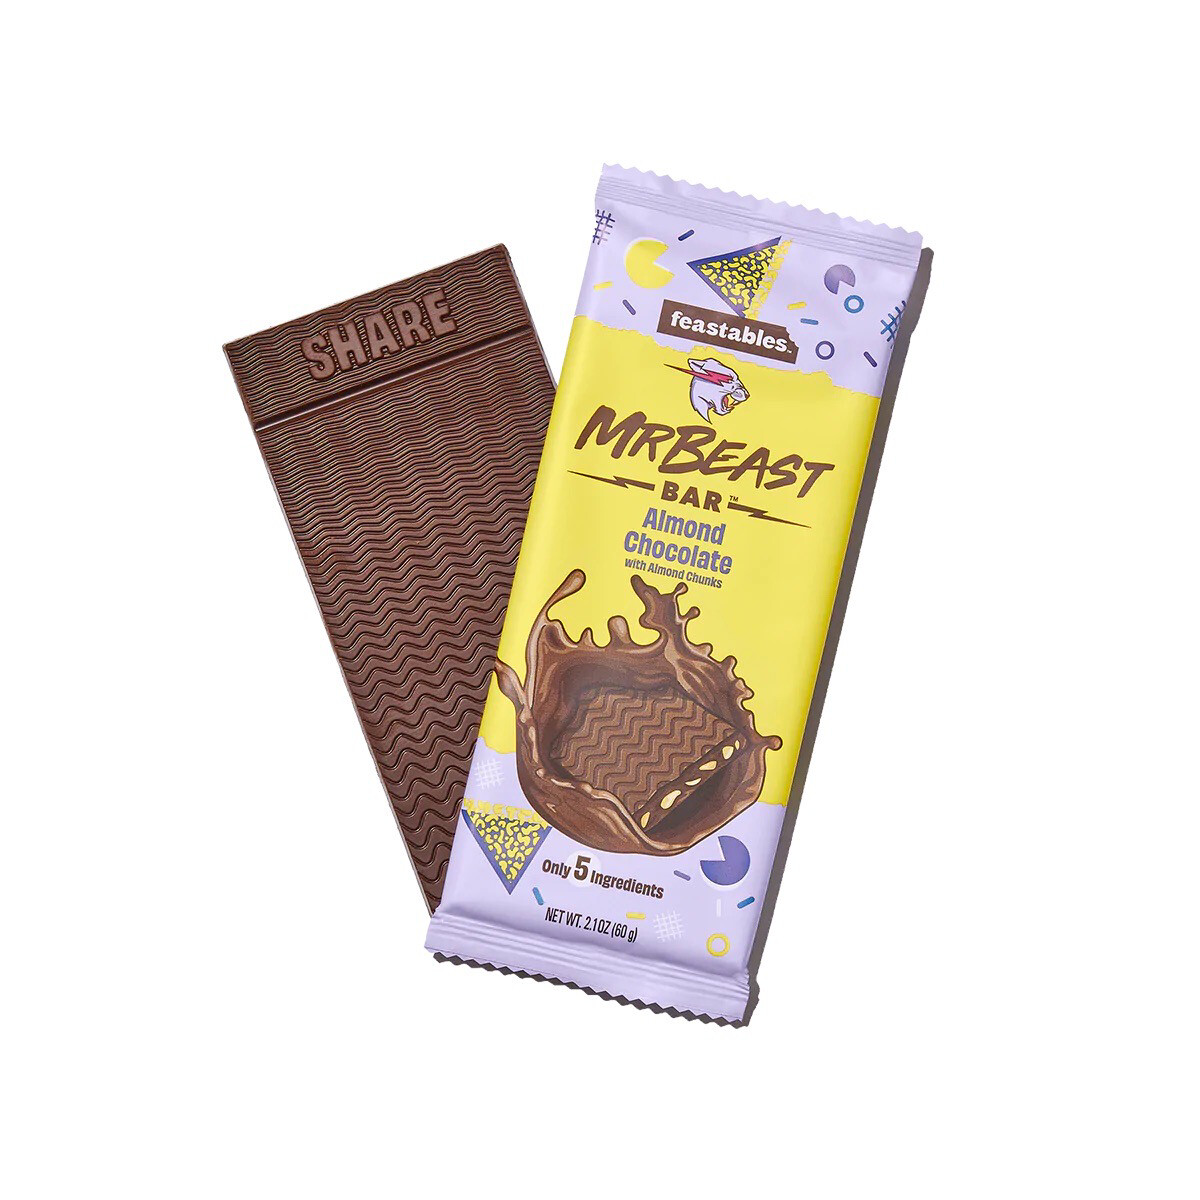 Feastables Mr Beast Bar Milk Chocolate Made with only 5 Ingredients 